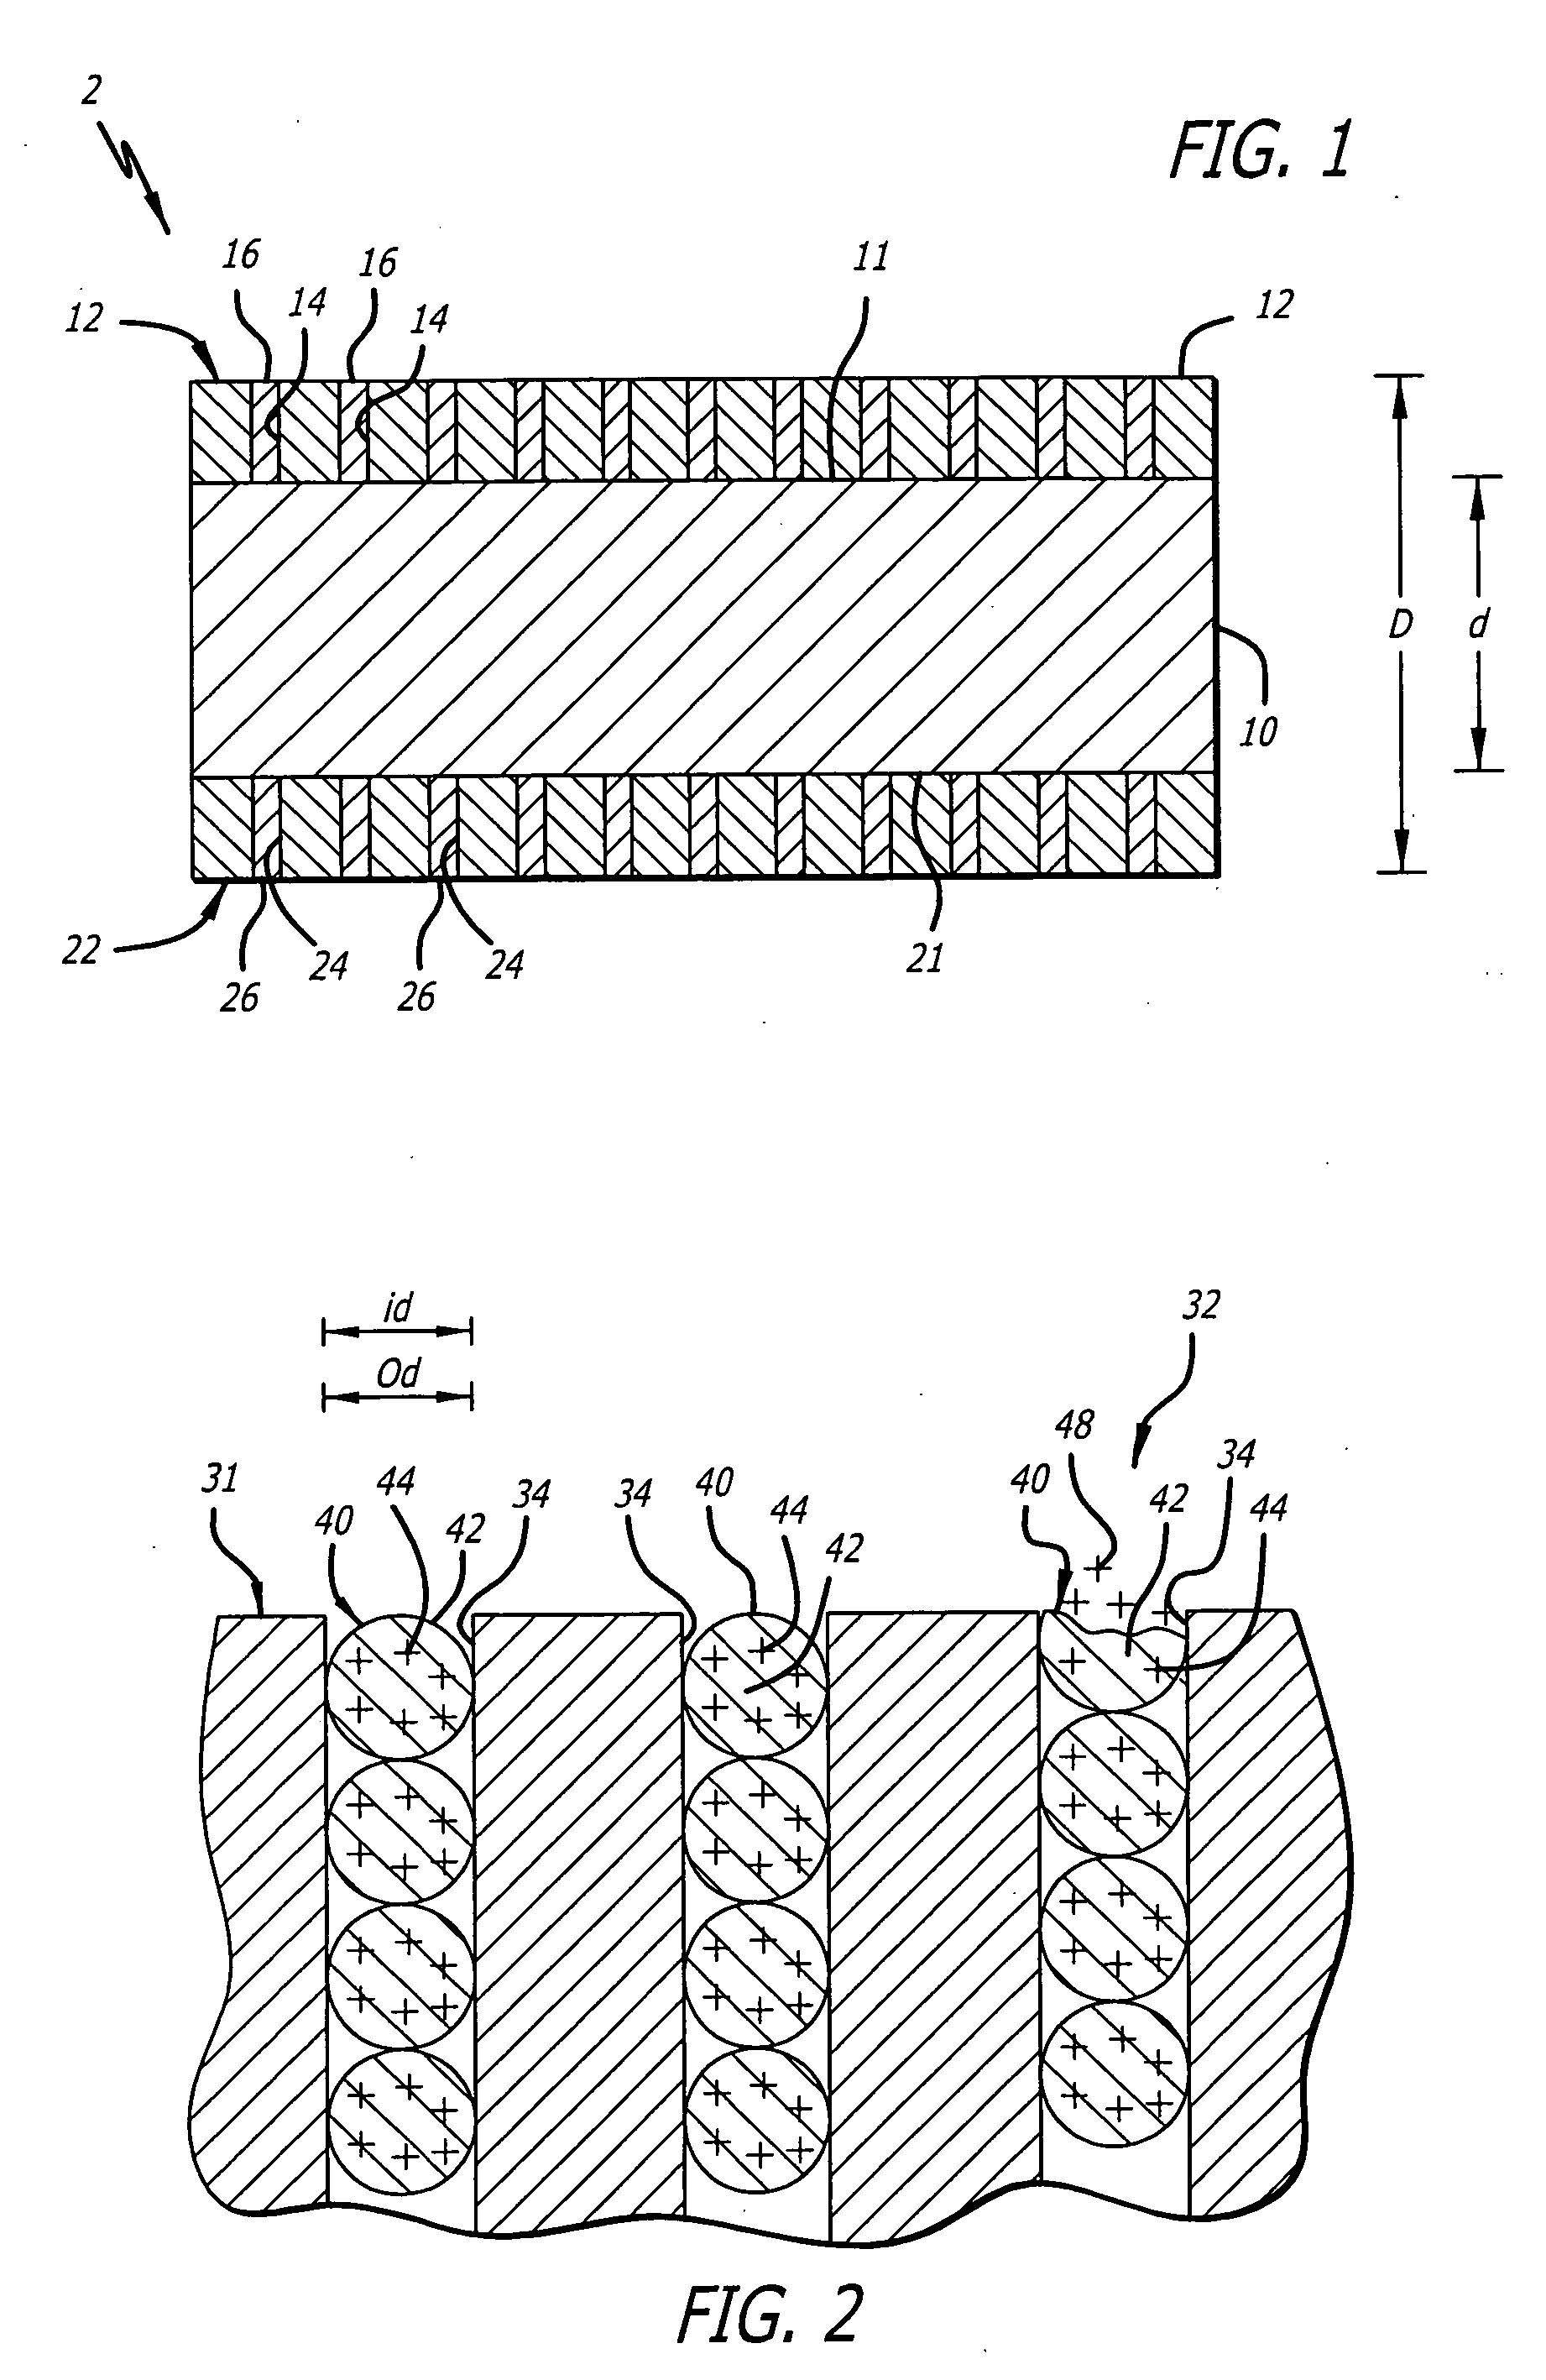 Implantable stent with endothelialization factor